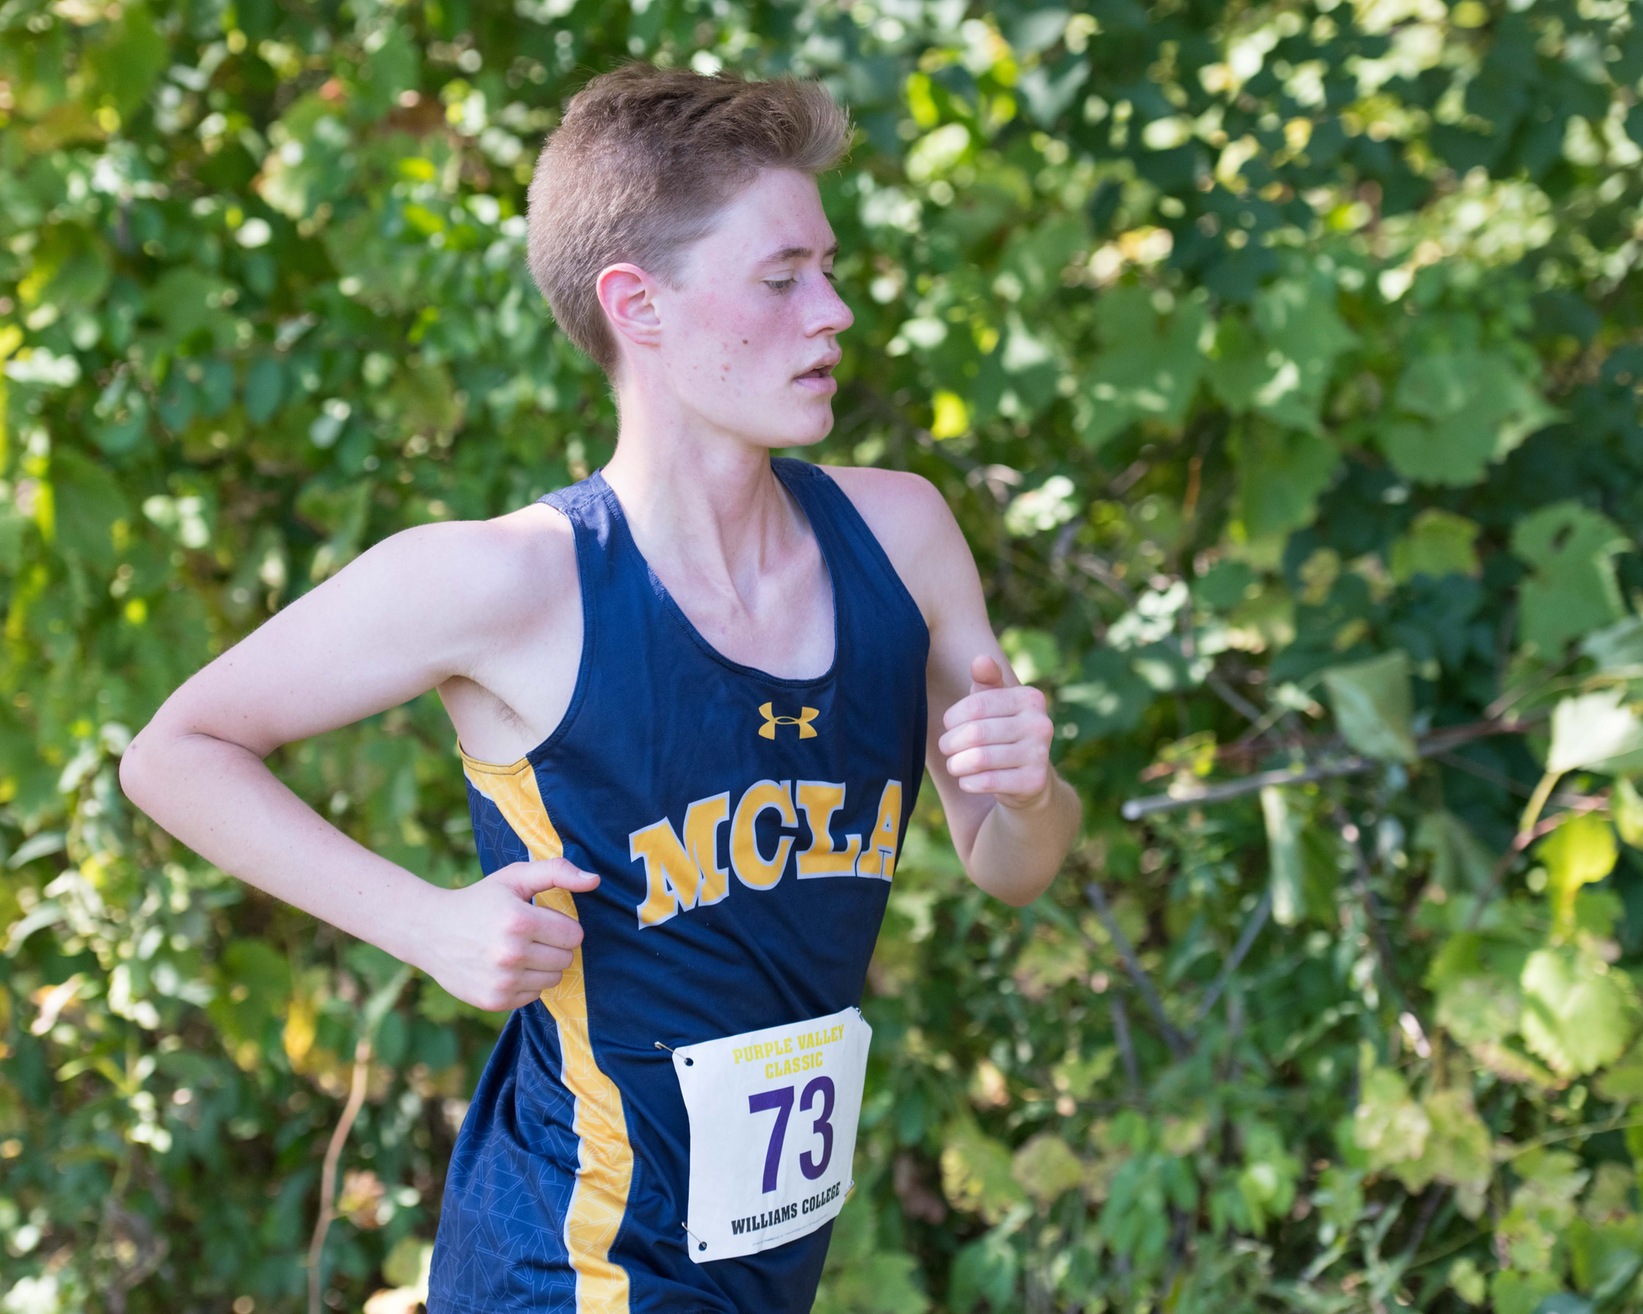 Gambill's 23rd place finish leads individuals at MASCAC Cross Country Championships